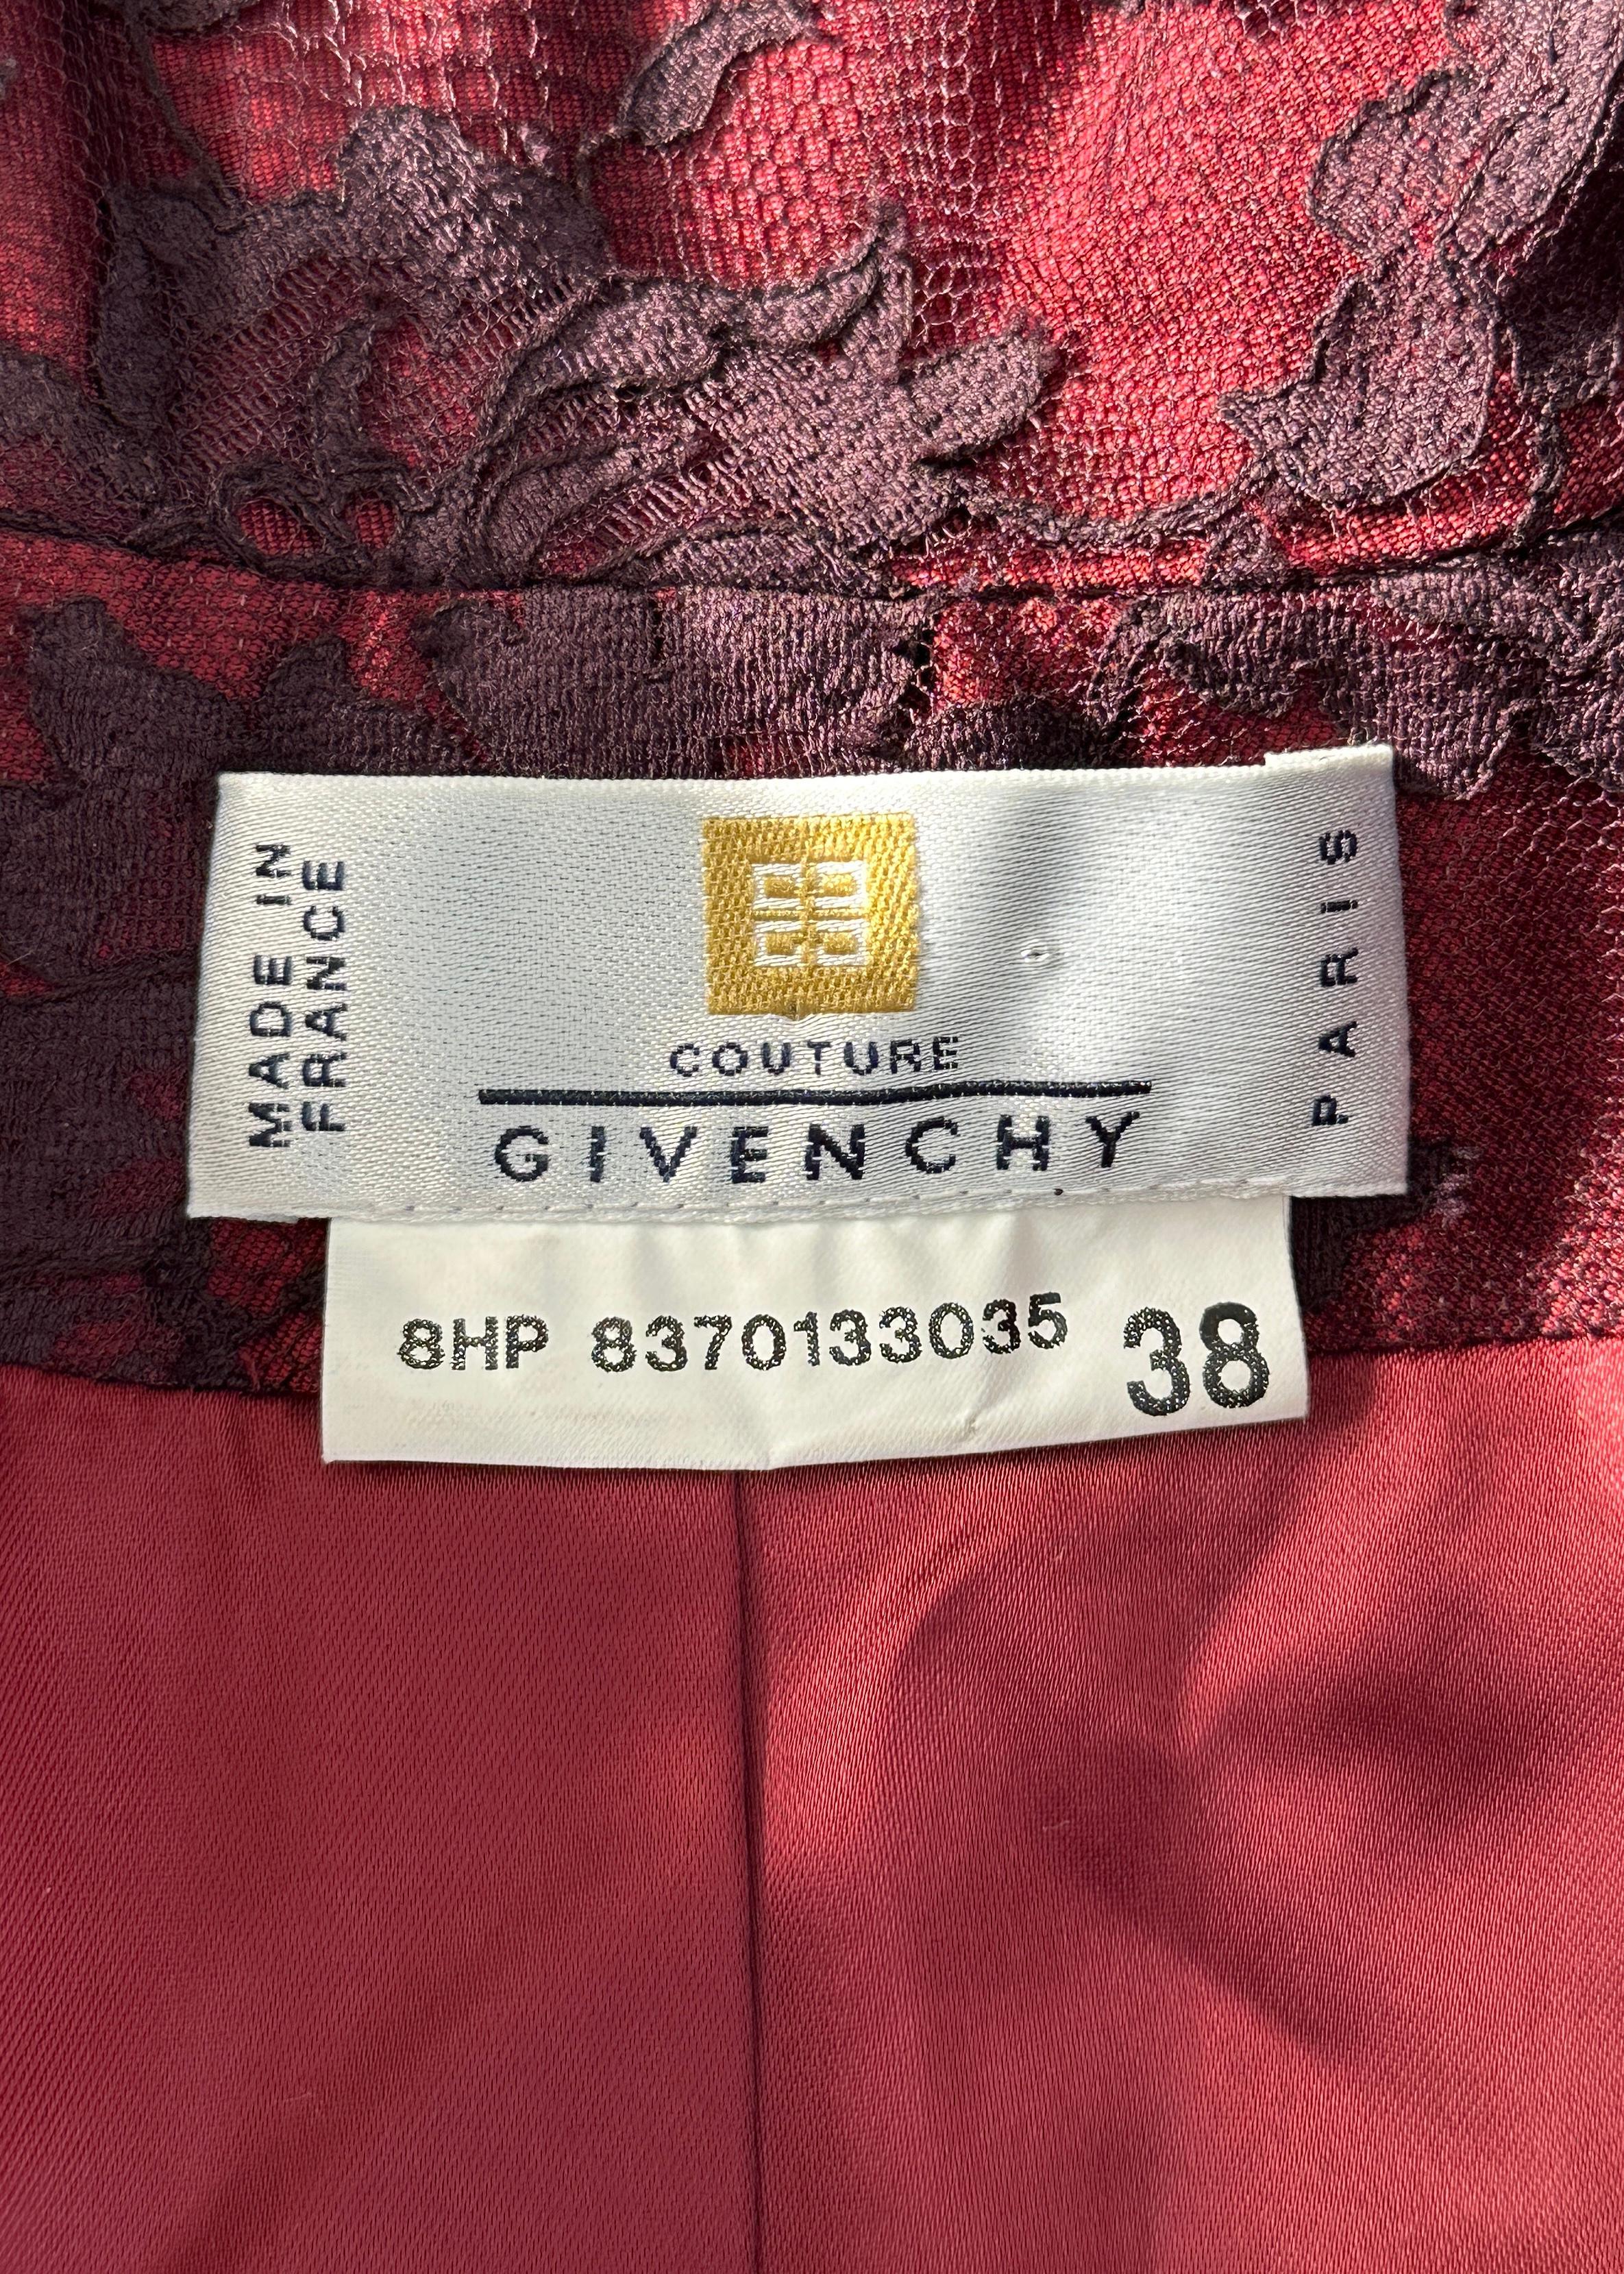 Givenchy Couture by Alexander McQueen Fall 1998 Red Silk Lace Jacket For Sale 1